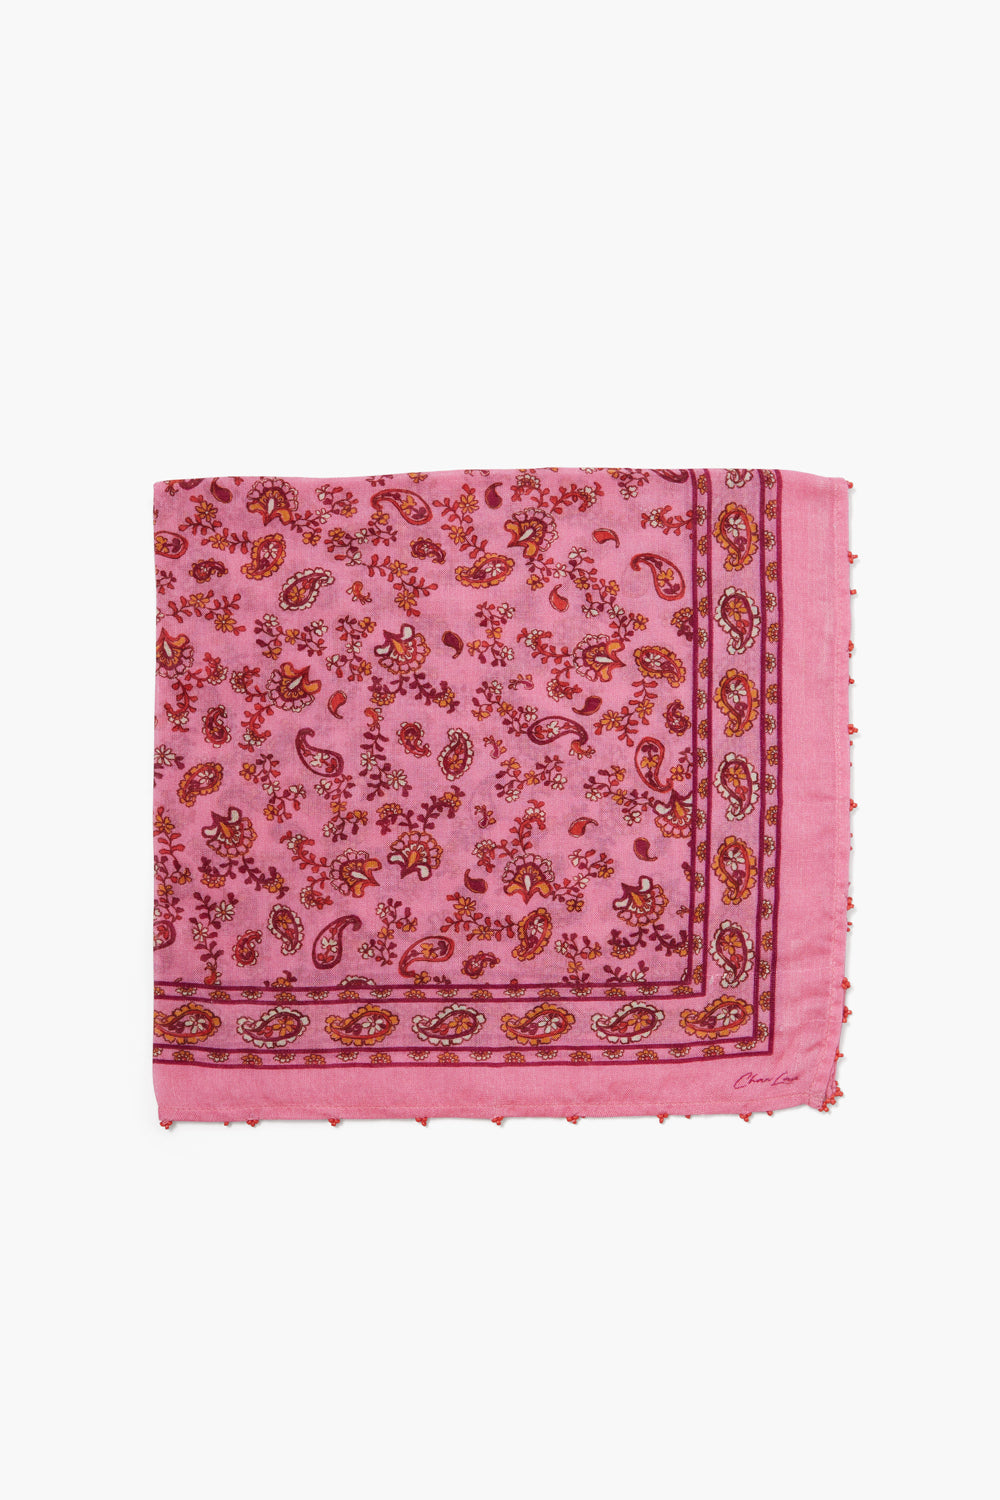 PAISLEY BANDANA WITH SEED BEAD EDGES - FUCHSIA PINK - Kingfisher Road - Online Boutique